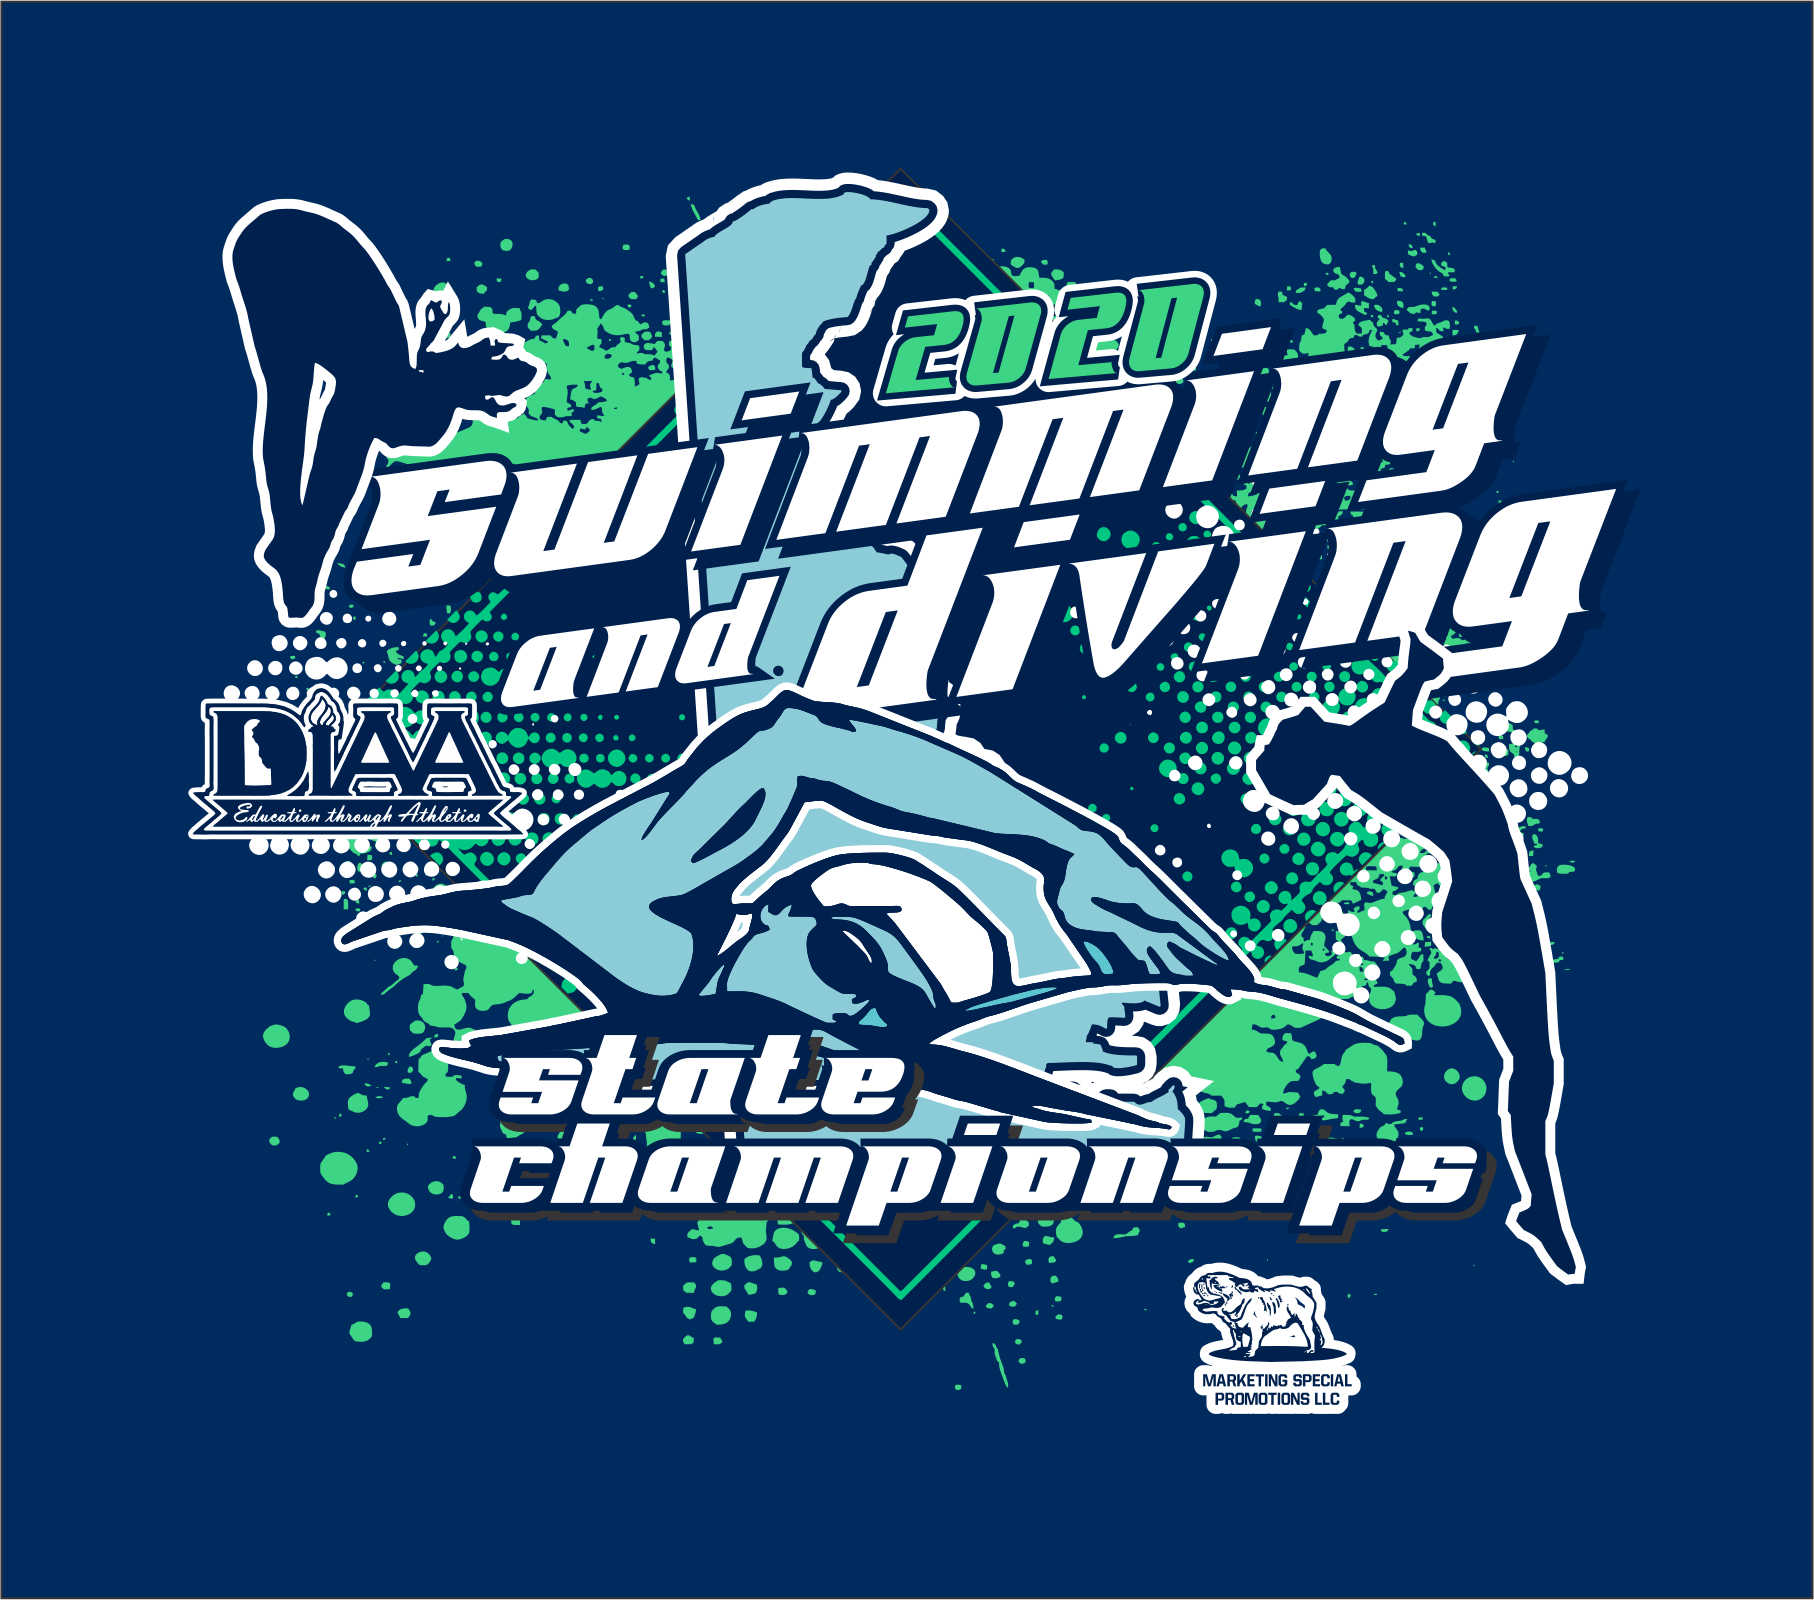 DIAA - 2020 Swimming/Diving States LS - Marketing Special Promotions